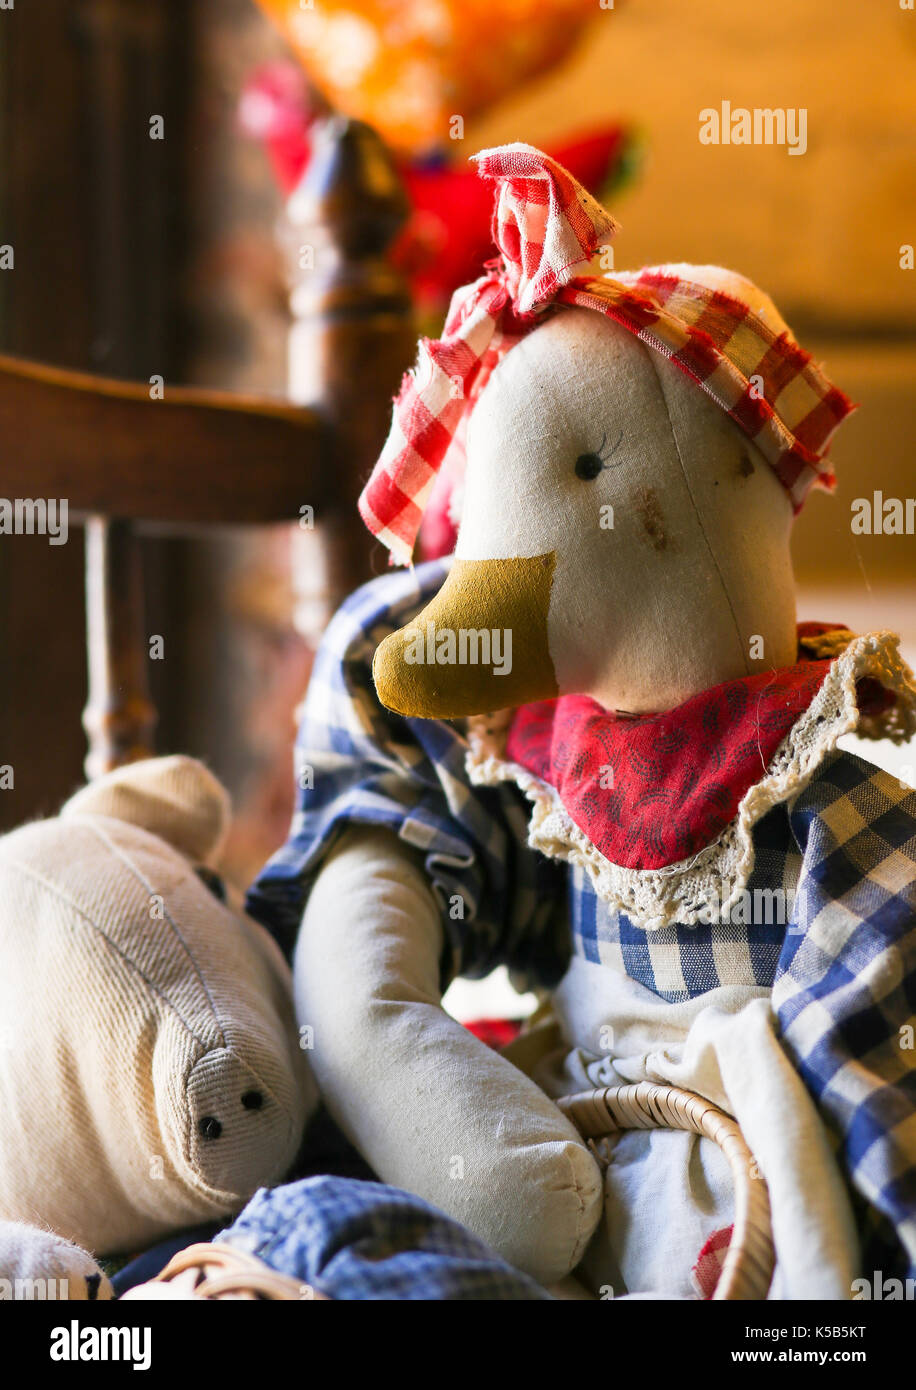 Cute old vintage duck fabric doll on the chair by the window with gingham cotton cloth Stock Photo